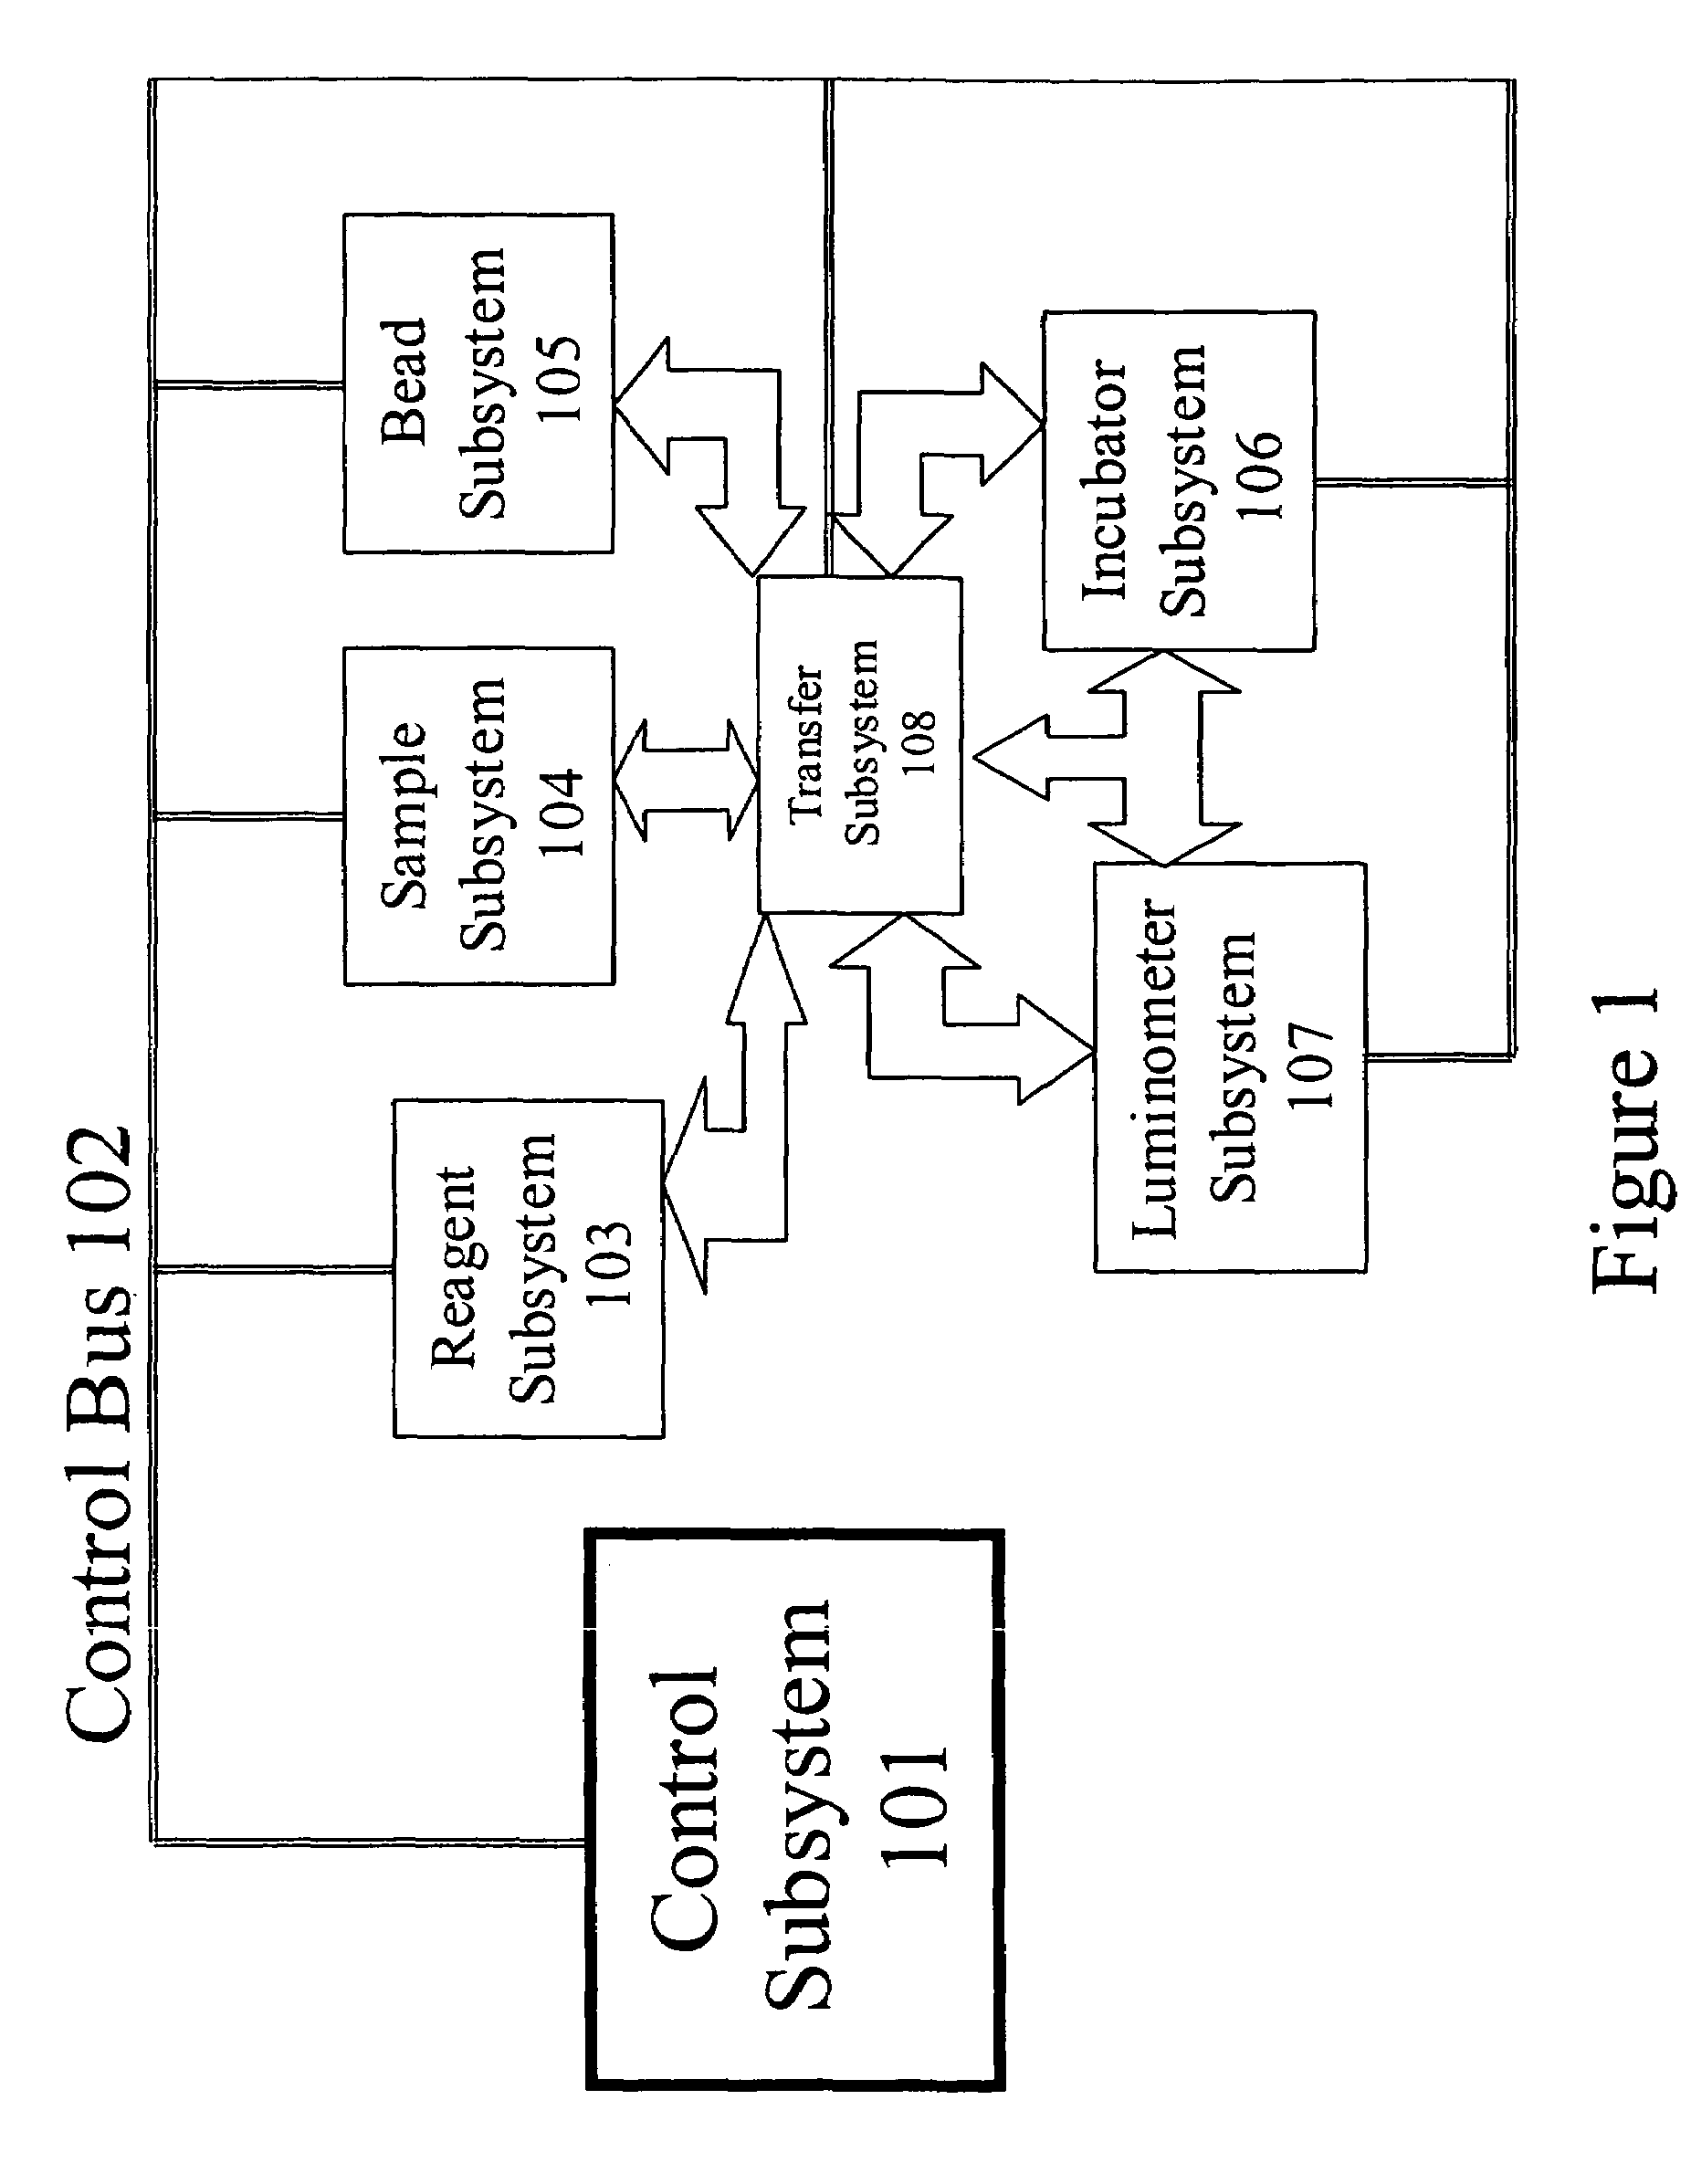 Carousel system for automated chemical or biological analyzers employing linear racks